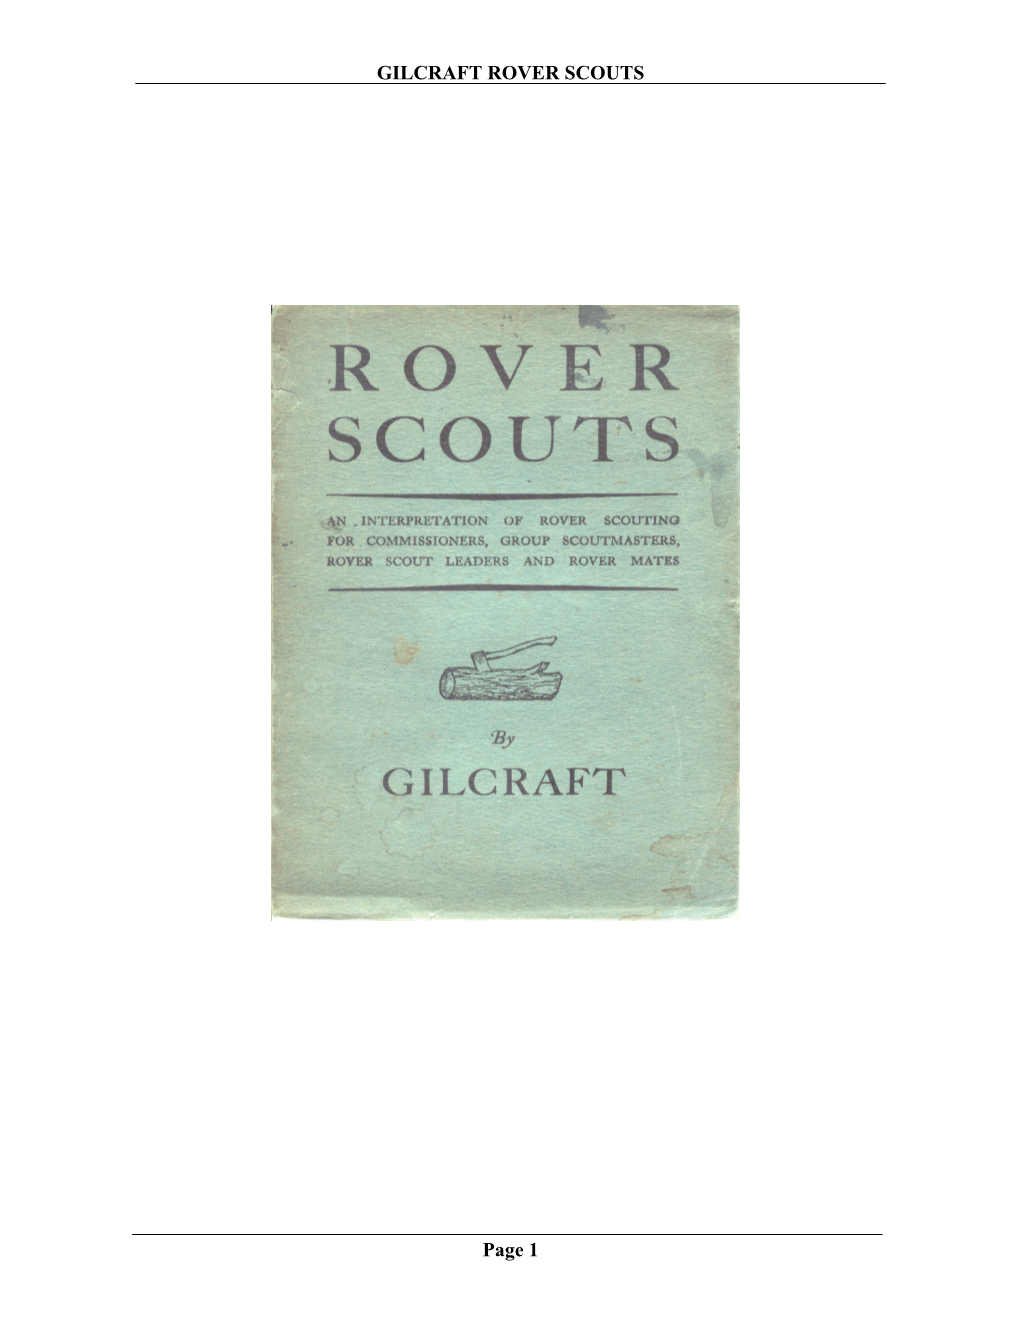 Gilcraft's Rover Scouts